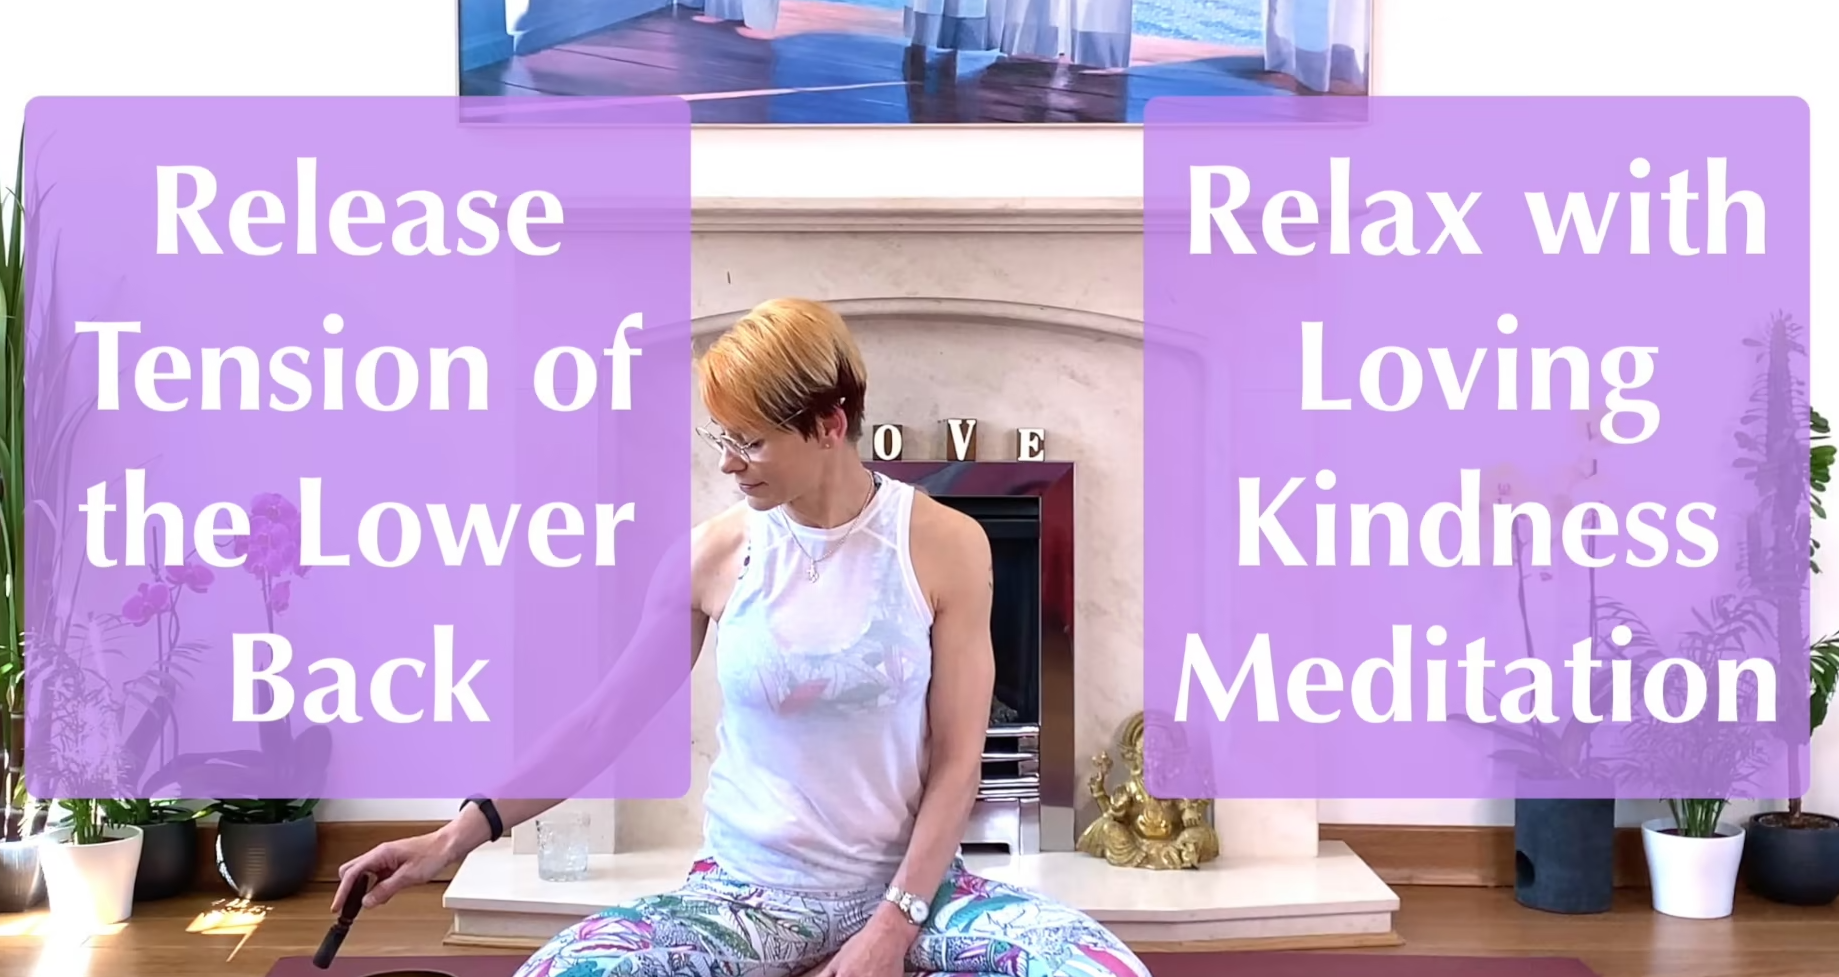 Olga Oakenfold - Release Tension of the Lower Back & Relax with Loving Kindness Meditation